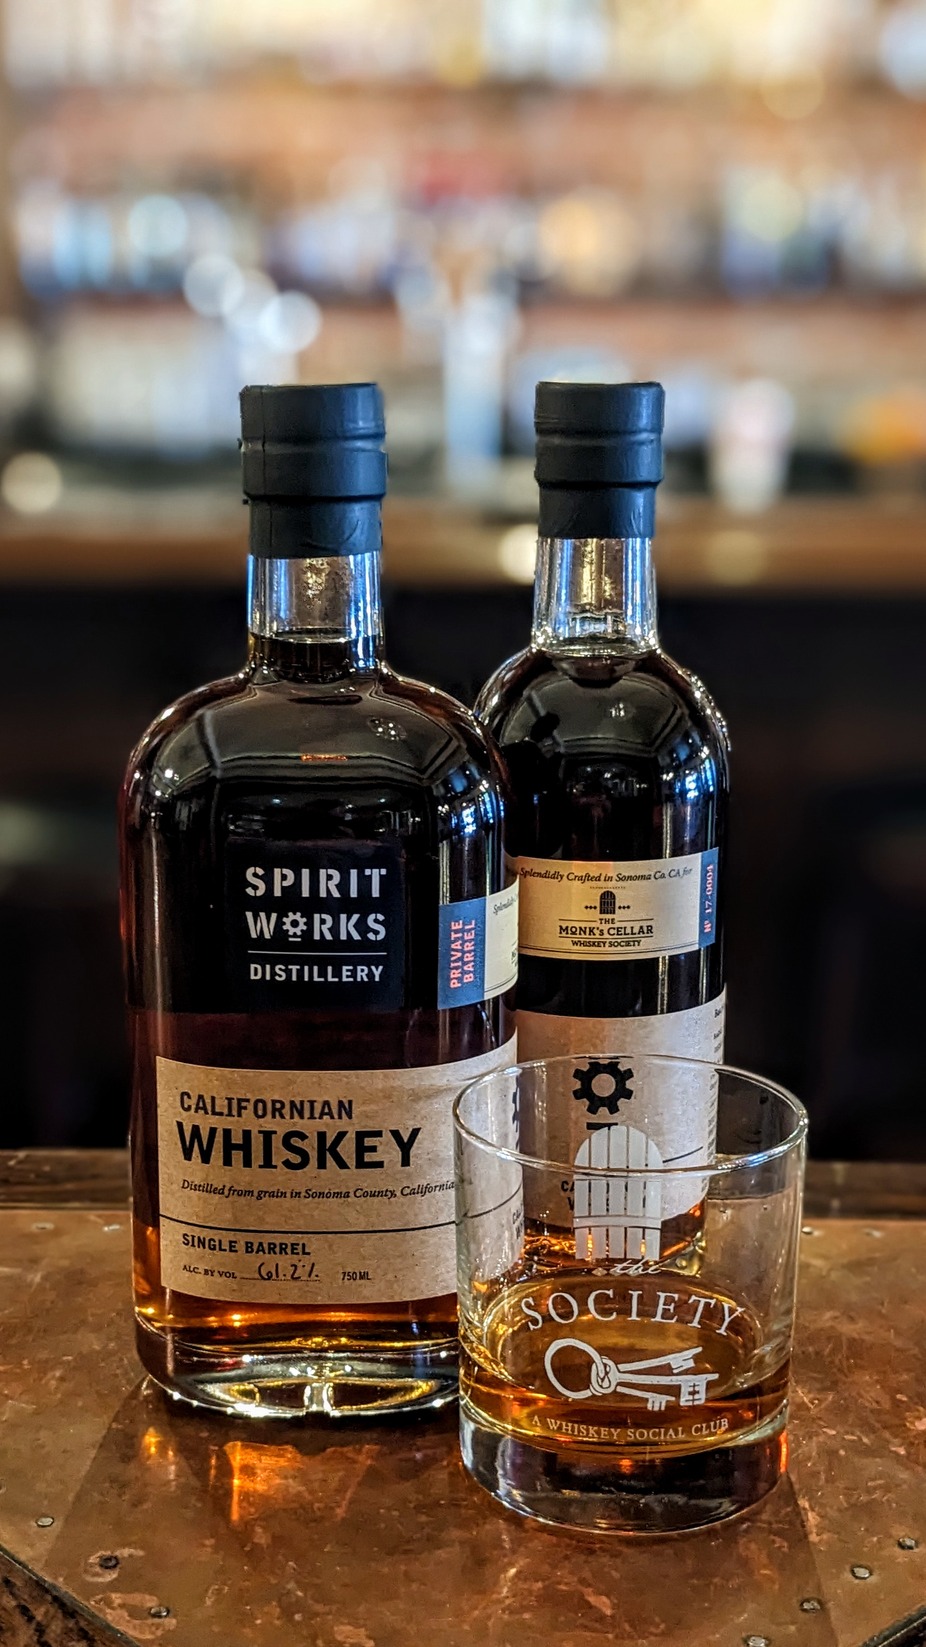 Try Our Next Whiskey Club Barrel Pick for FREE! event photo